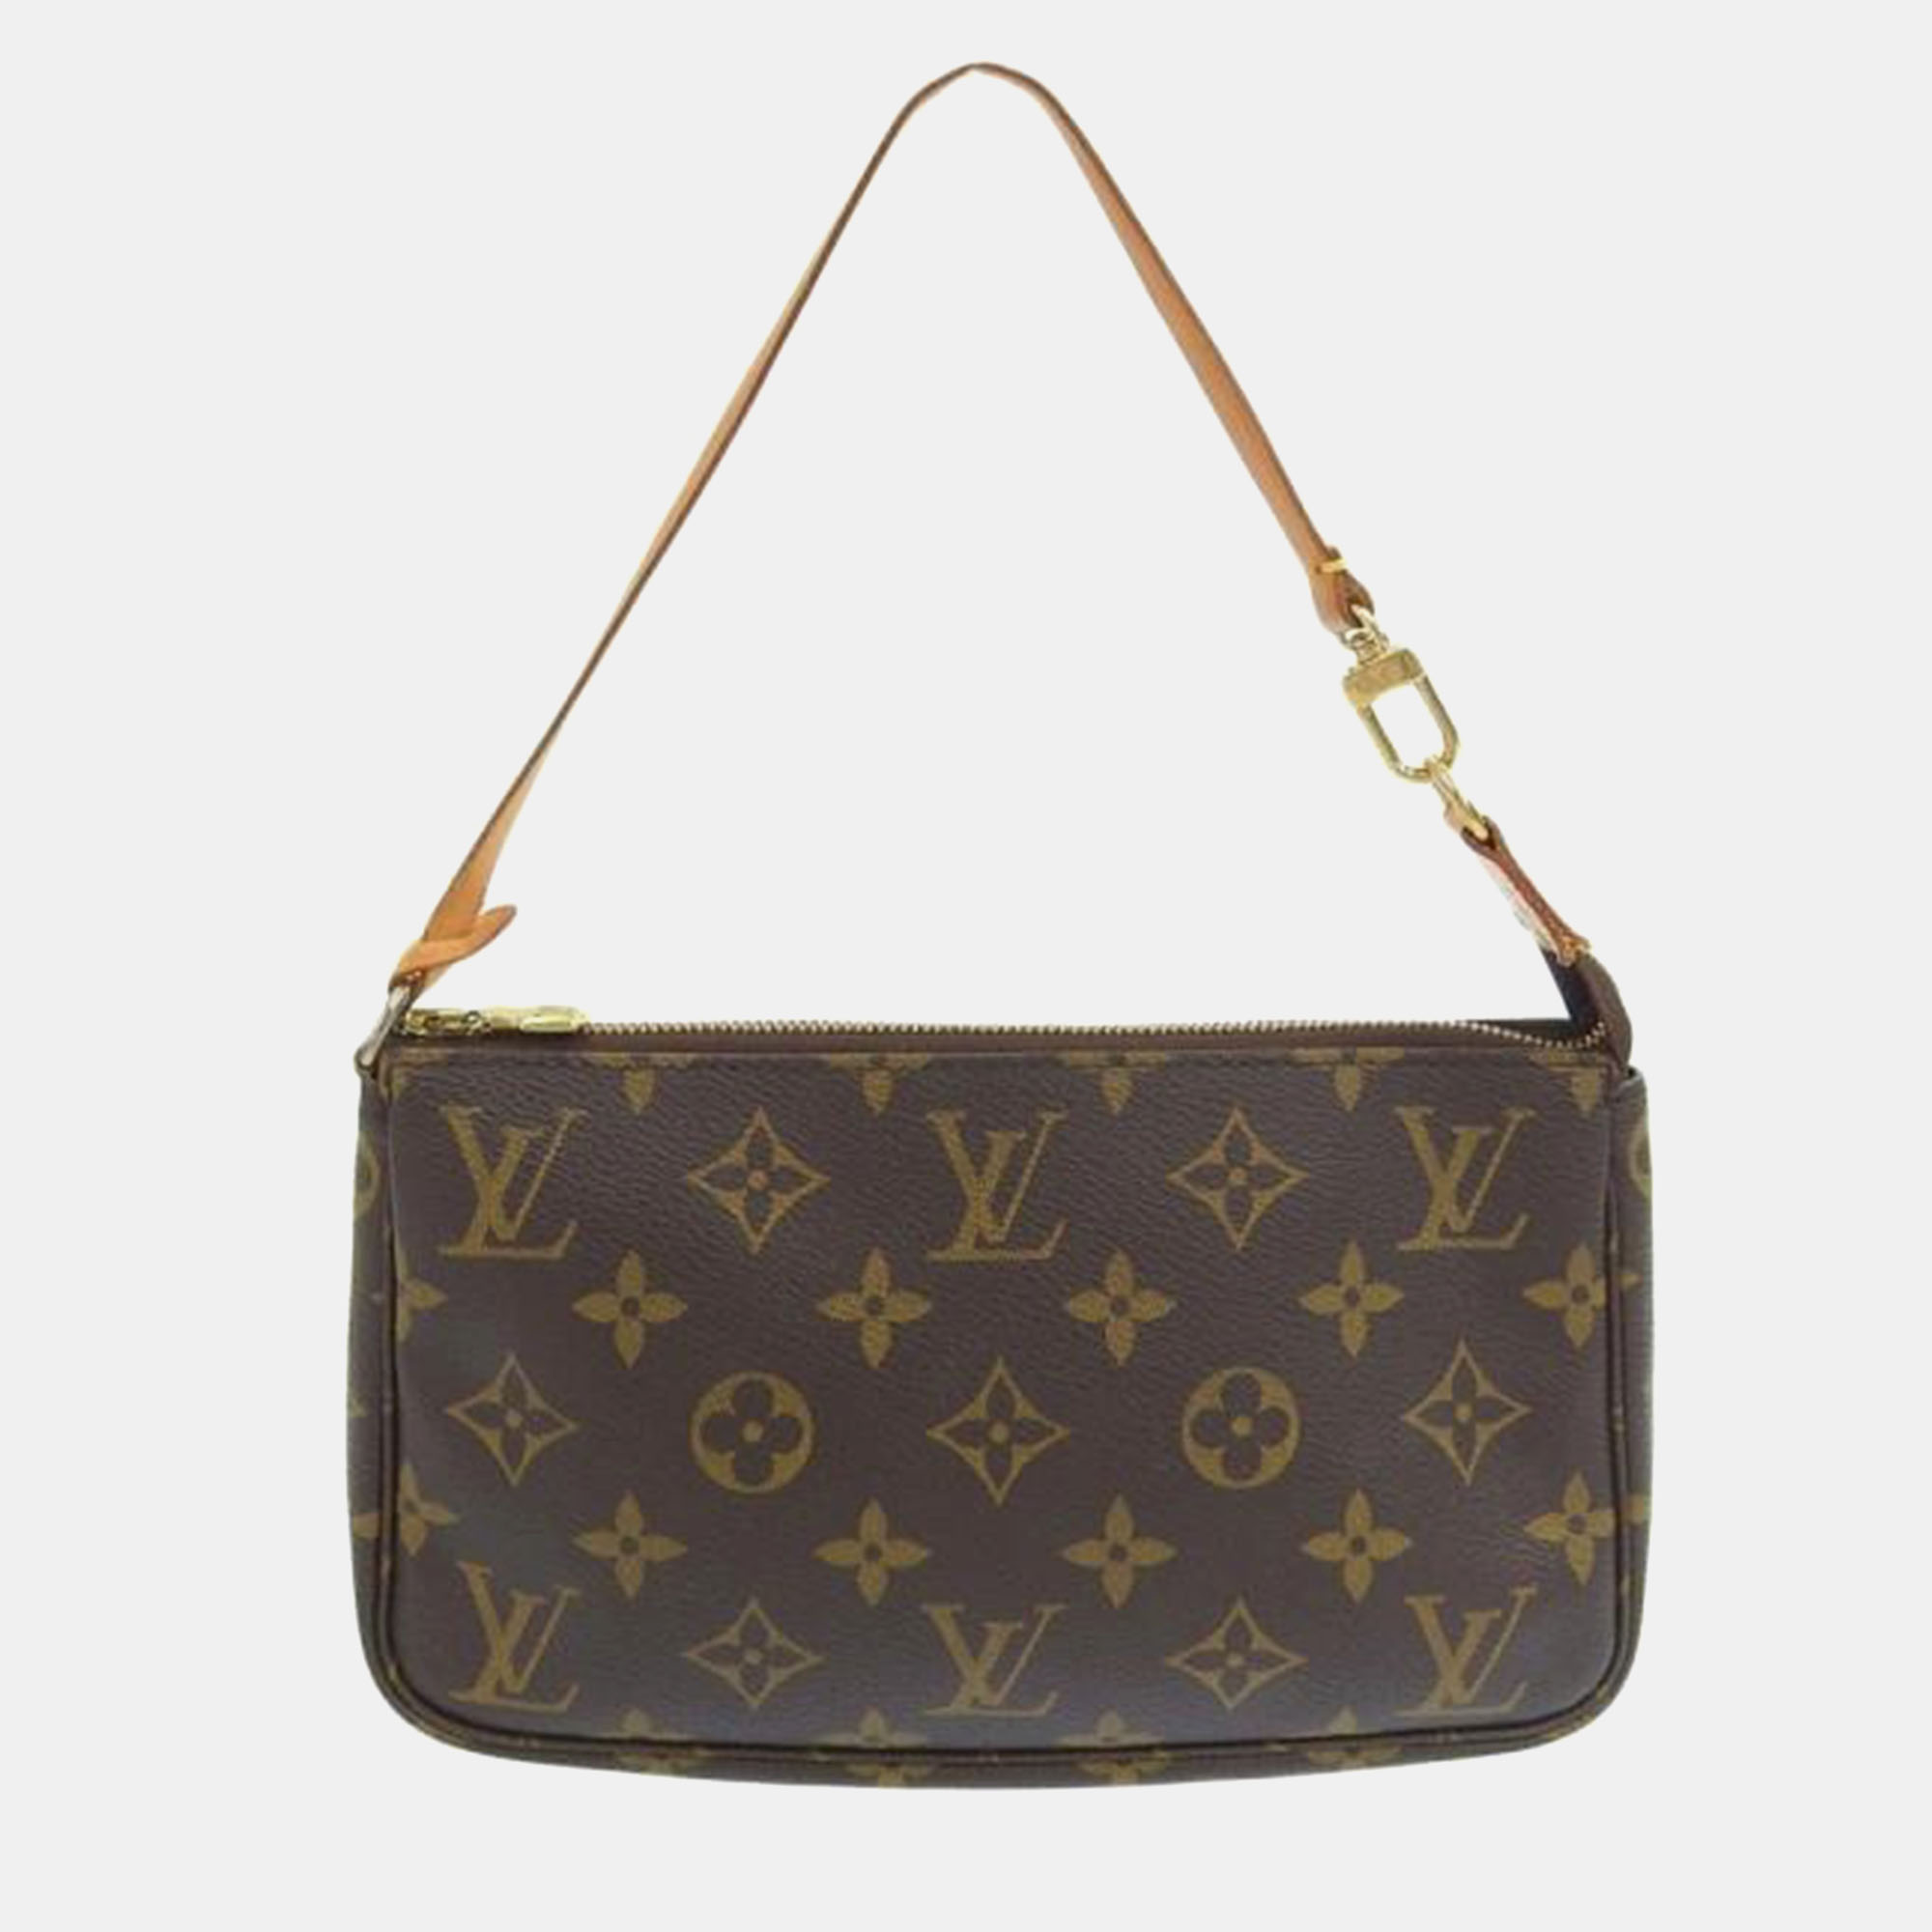 Crafted with exquisite precision this timeless Louis Vuitton clutch combines luxury with practicality ensuring you make a chic statement at every soirée.